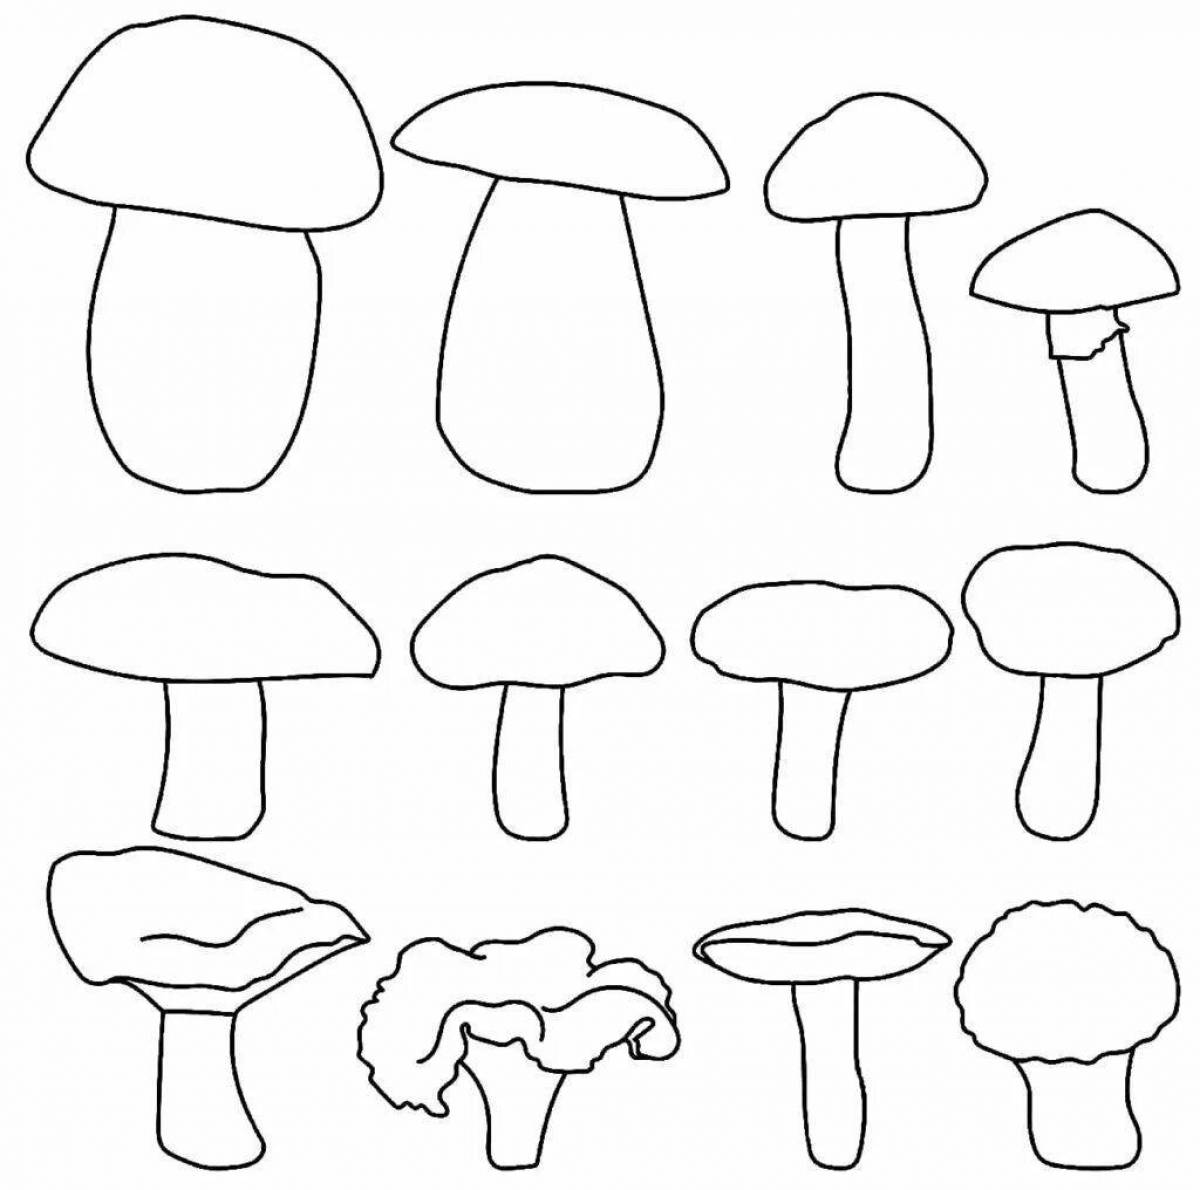 Merry mushroom coloring book for 3-4 year olds